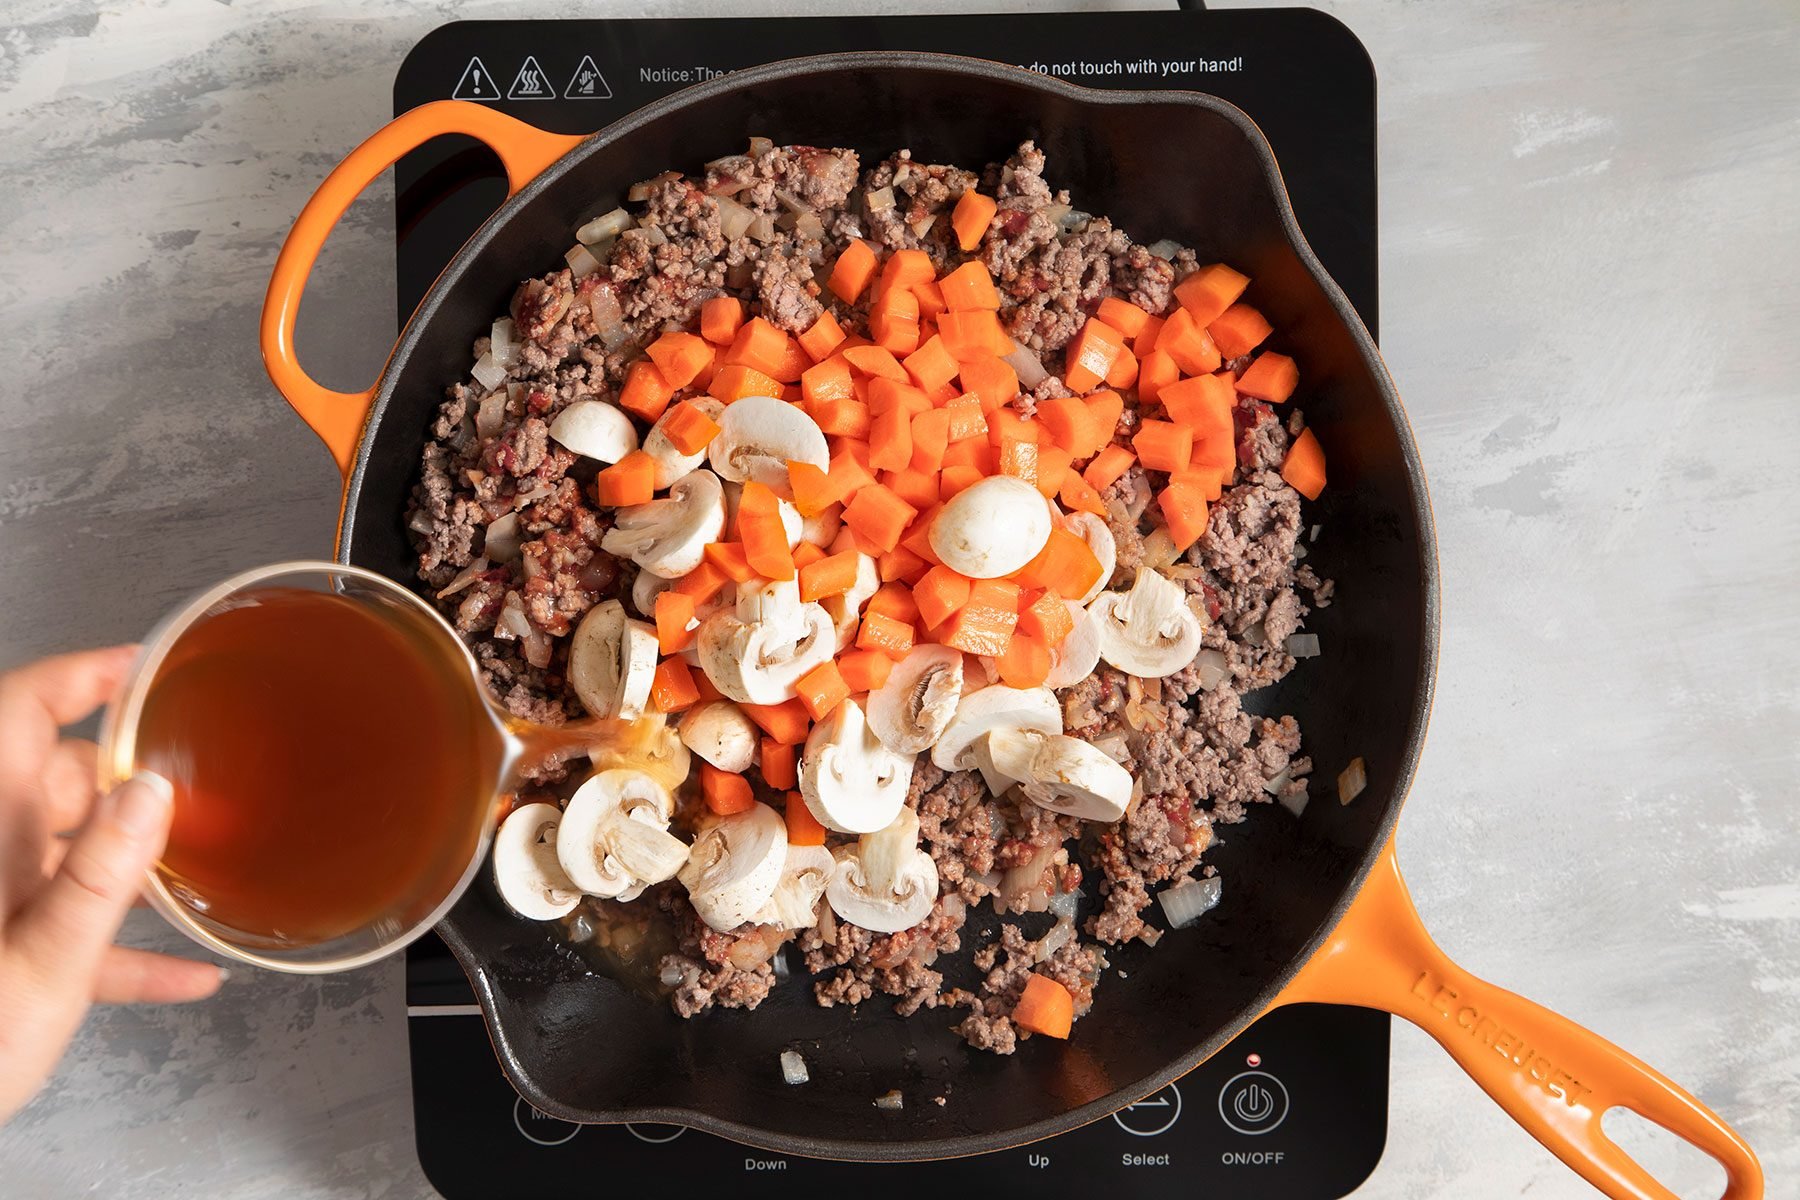 Carrots, Mushrooms and wine added in meat mixture cooking in skillet